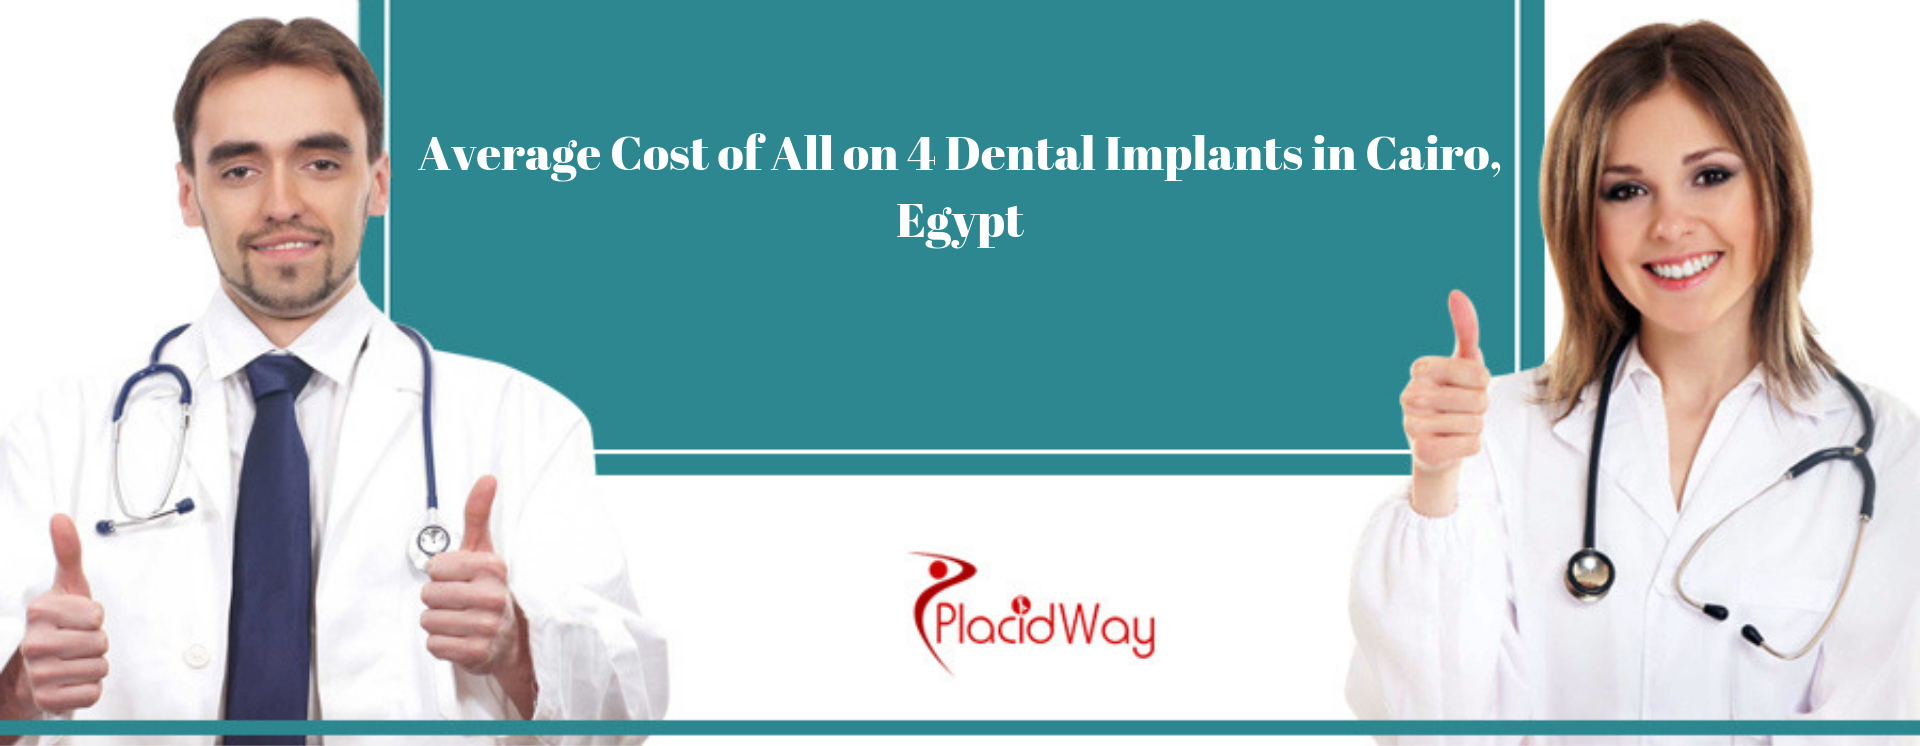 Cost of Dental Implants in Cairo, Egypt